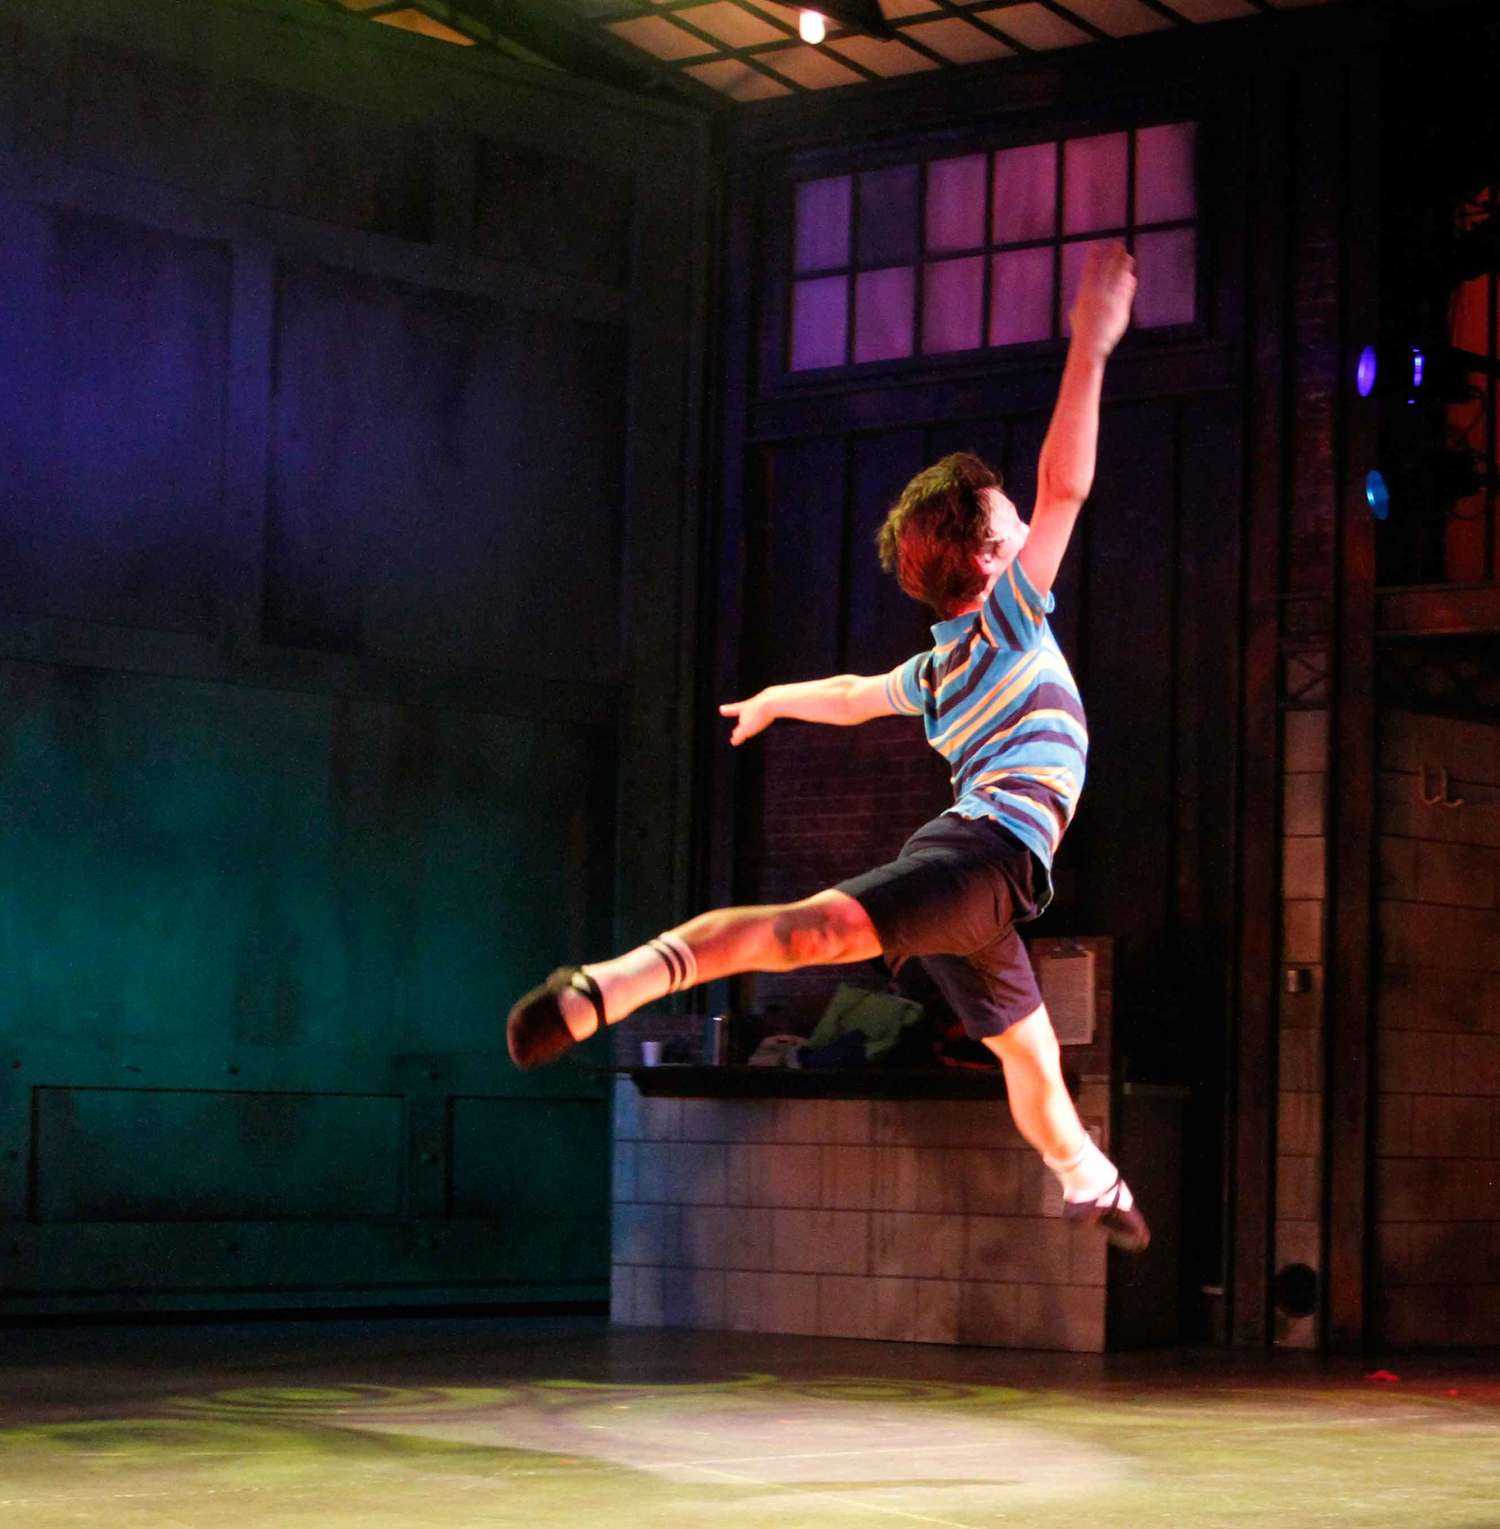 Billy Elliot will leap into your heart!
-Reg Madison Photography 1